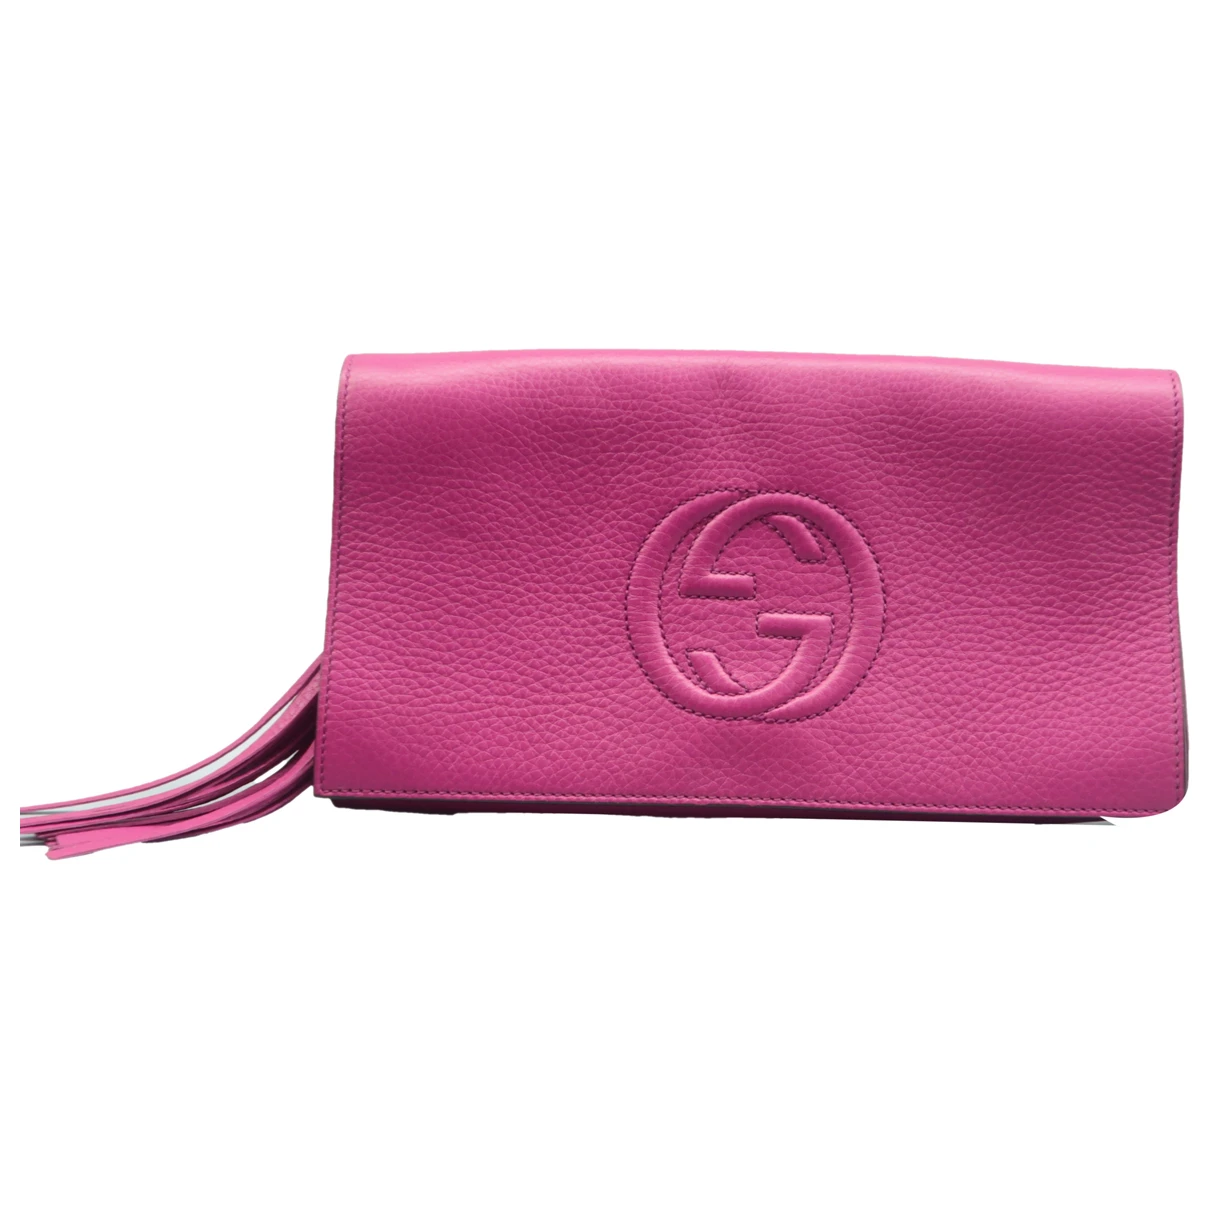 Pre-owned Gucci Soho Leather Clutch Bag In Pink